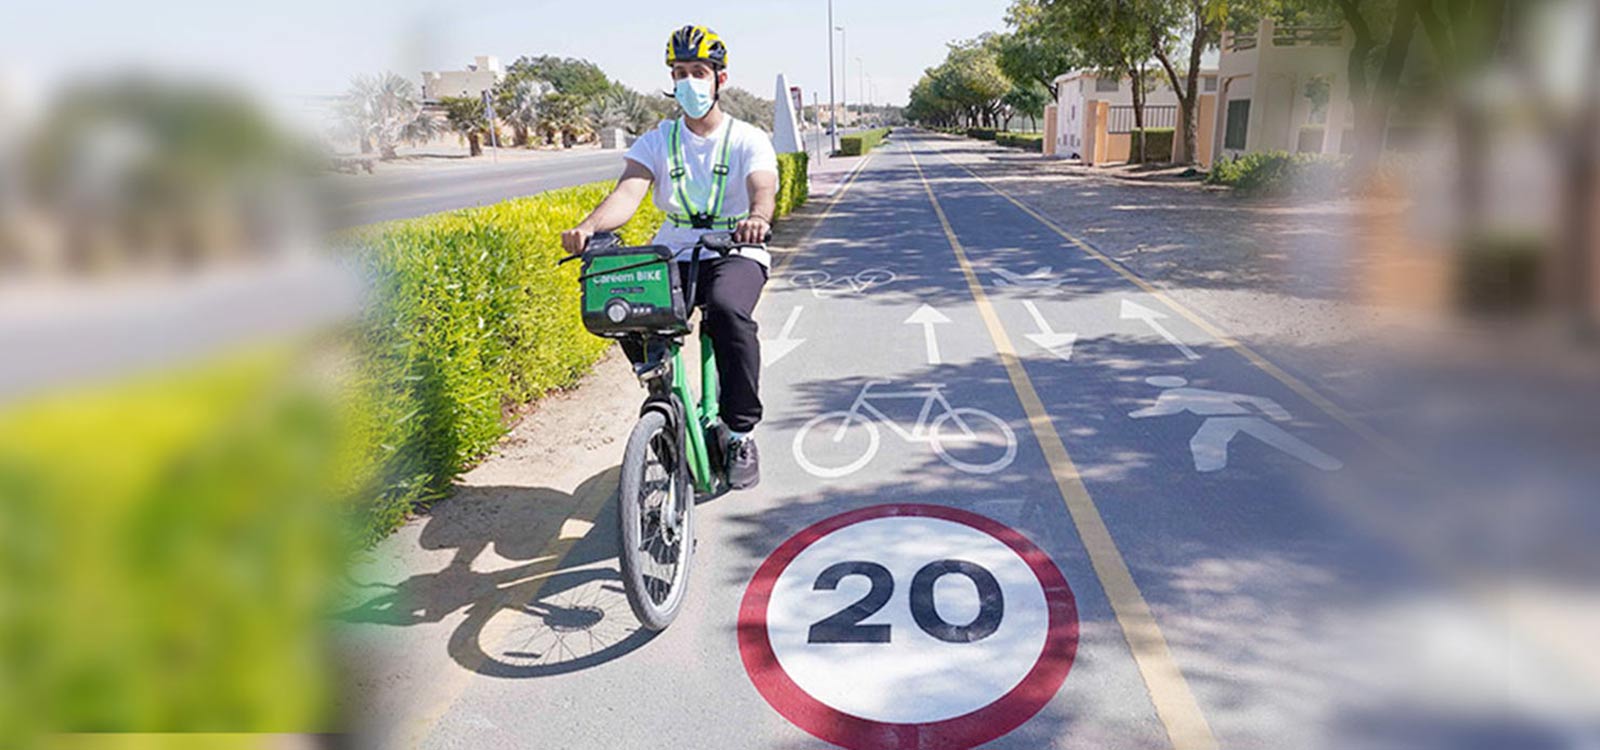 Up to Dhs5,000 fine for violating bikes regulations in Abu Dhabi - GulfToday